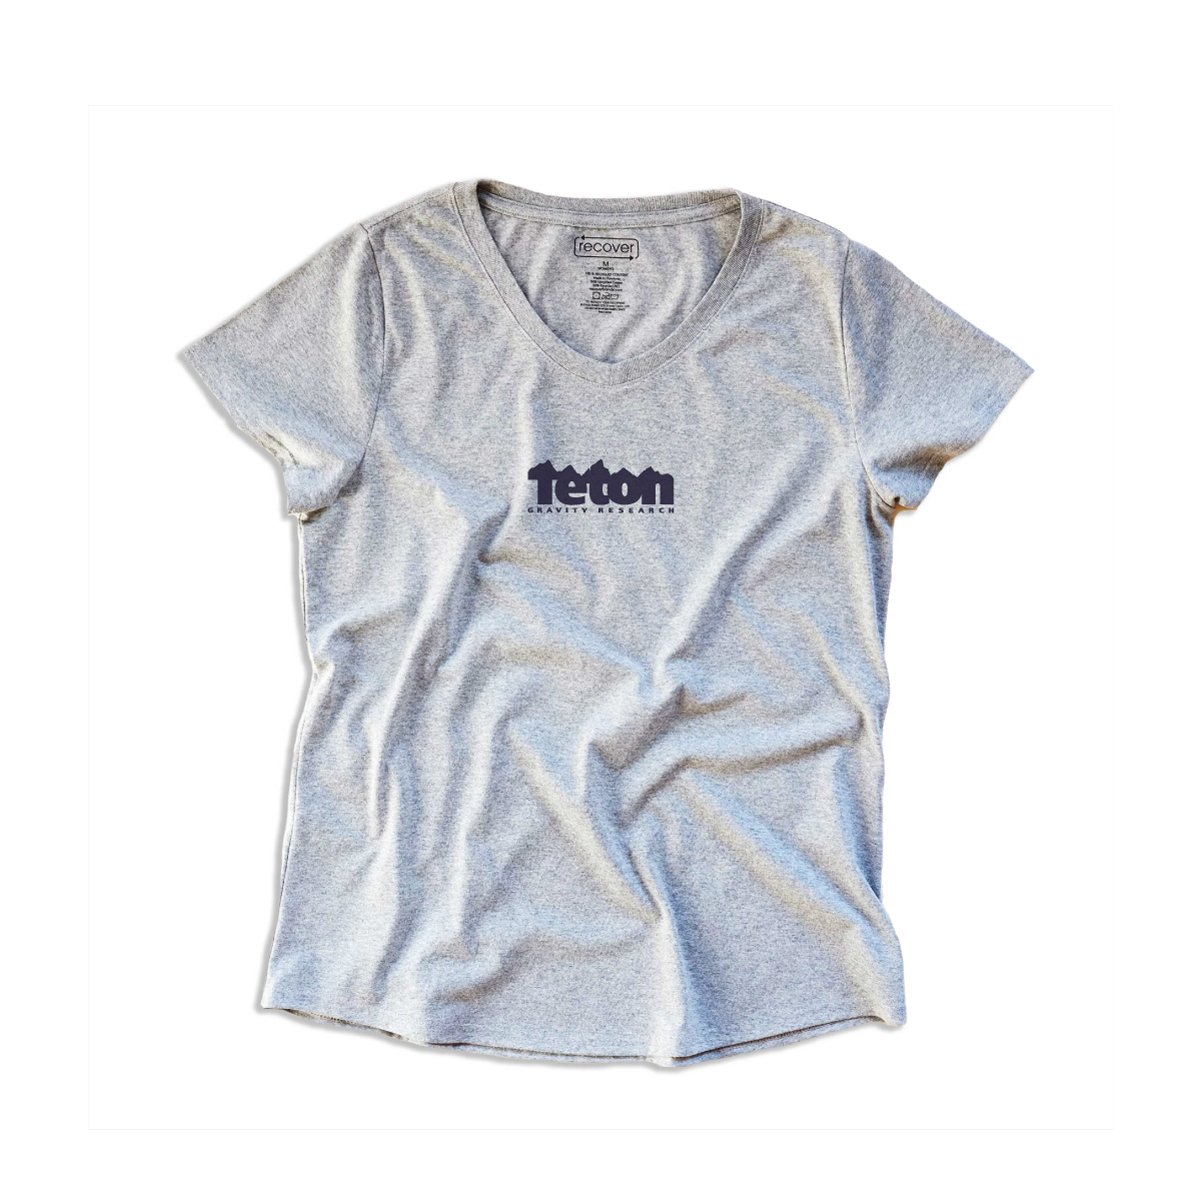 Women's Recycled Classic Tee - Teton Gravity Research